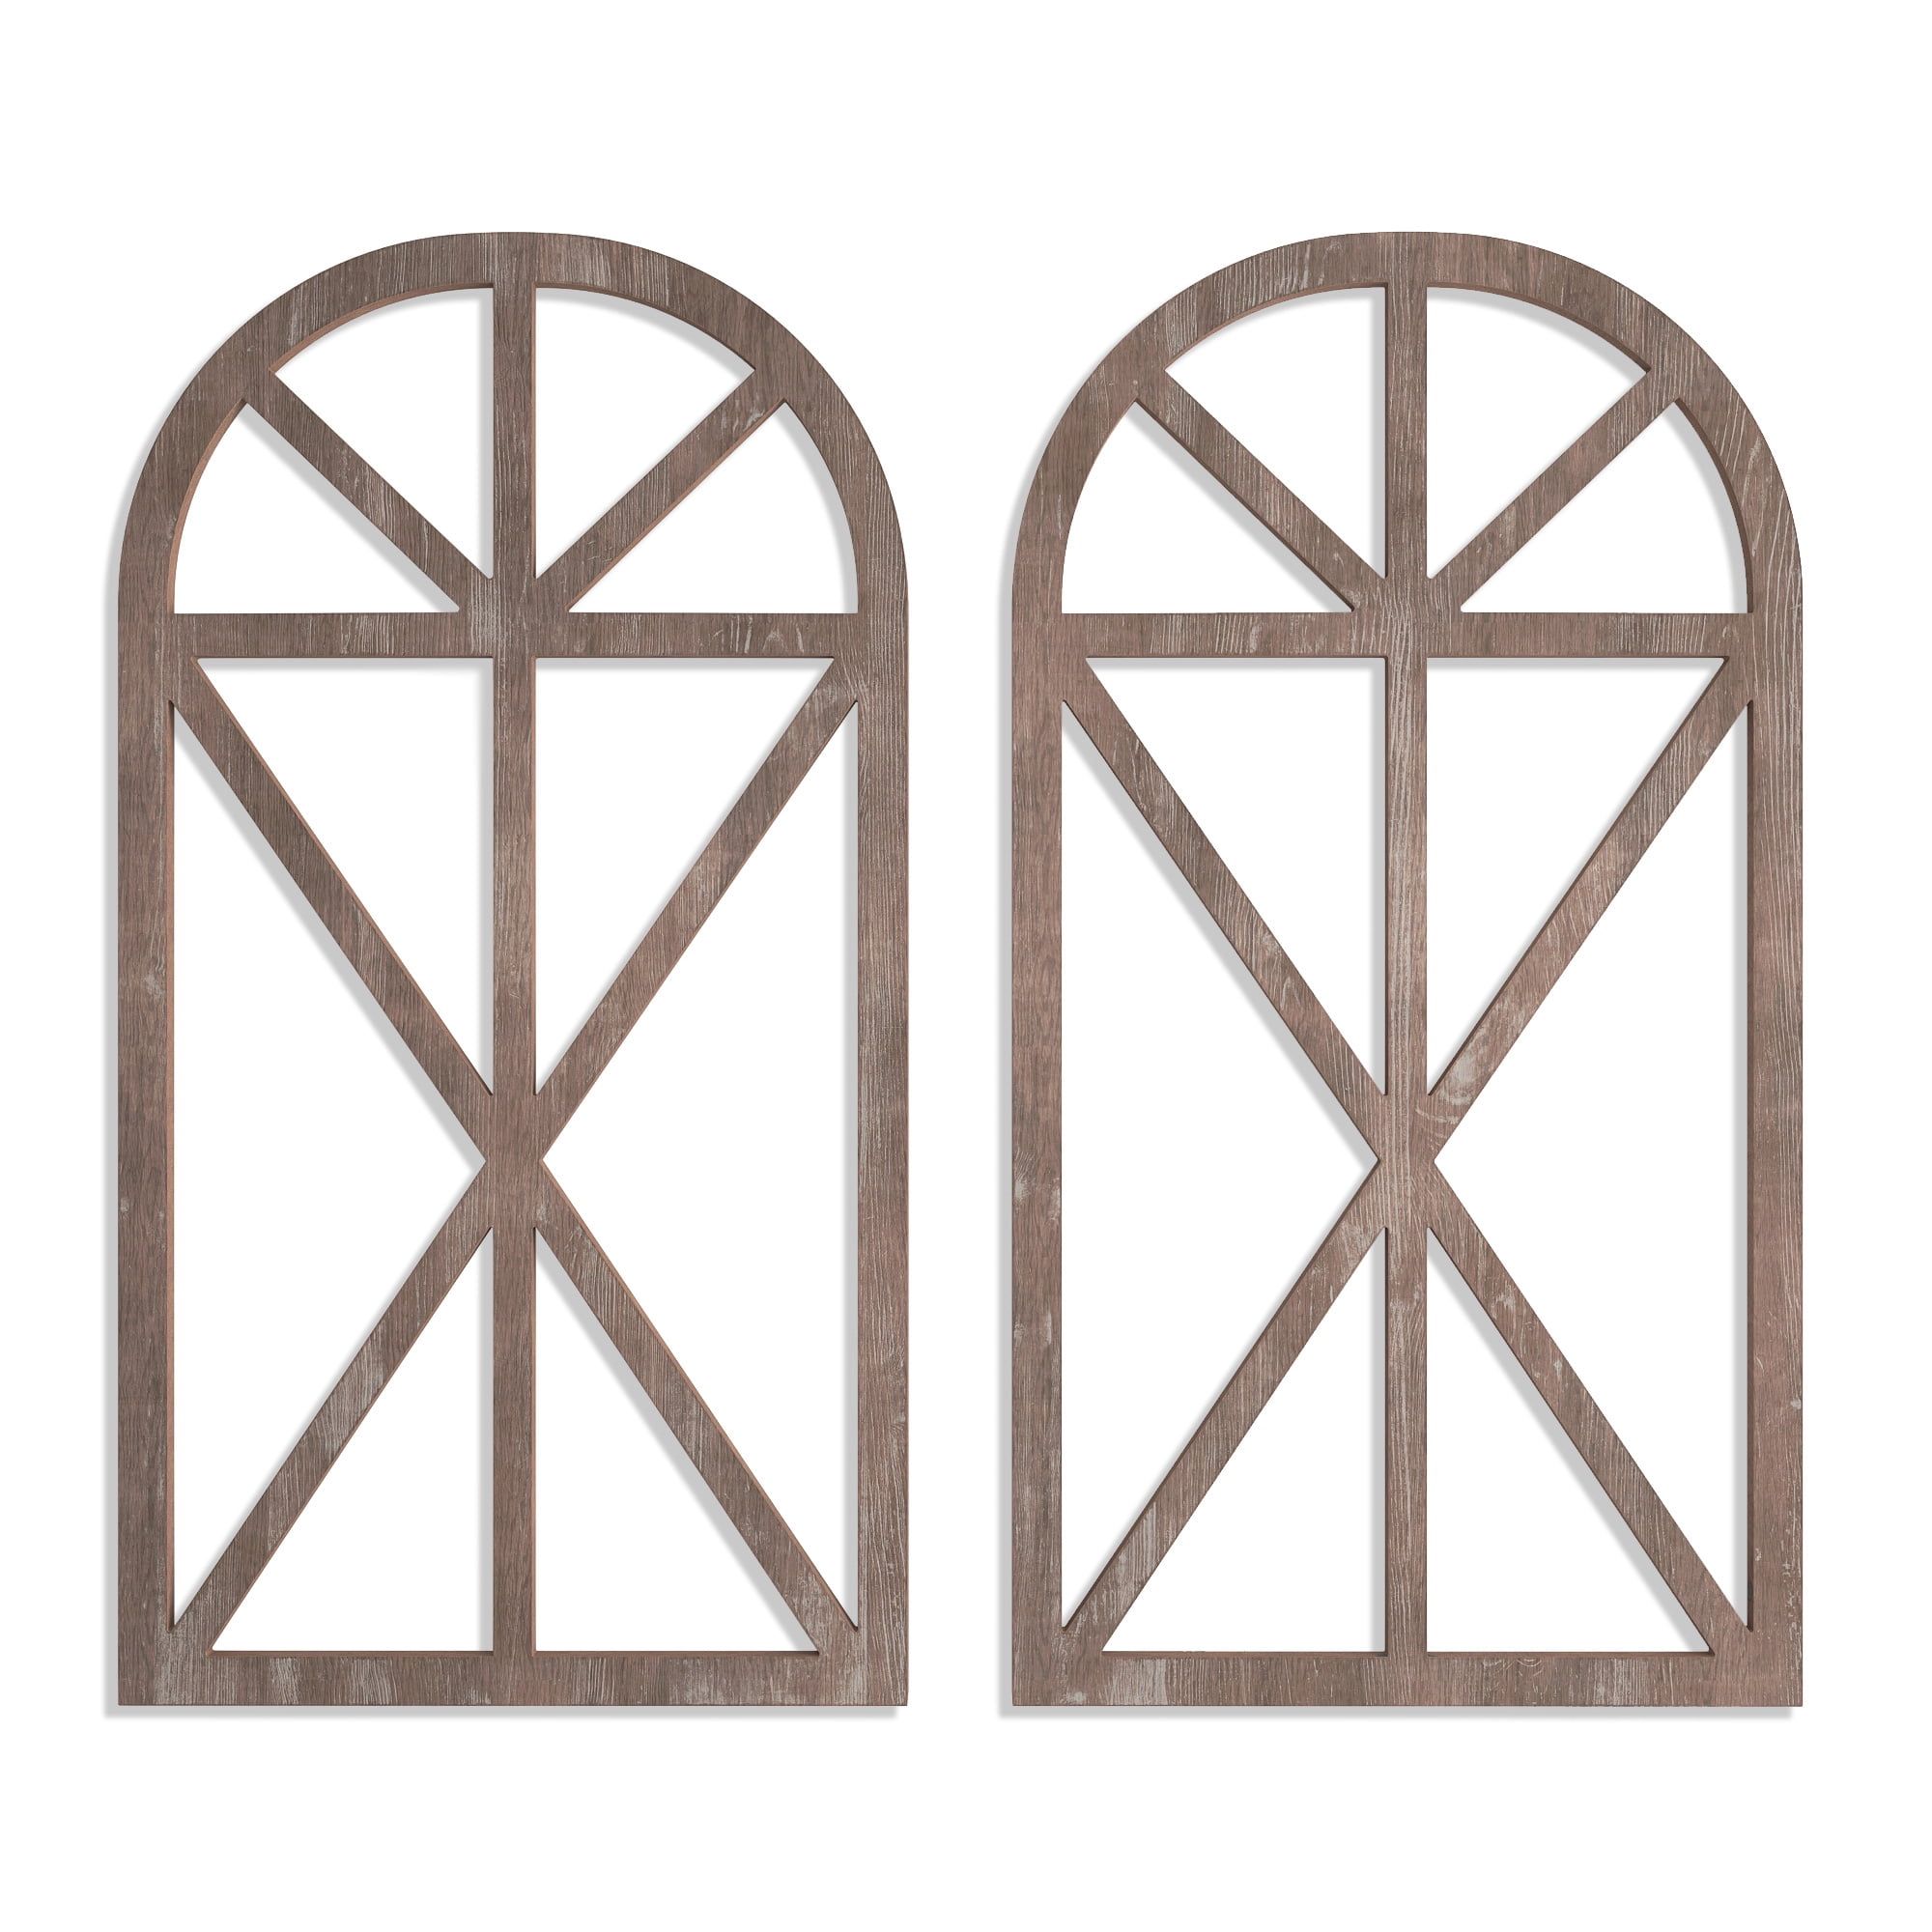 Buy Wall Hanging Ornaments Rustic Arched Window Frame Decor Handmade  Artwork Decorations - MyDeal